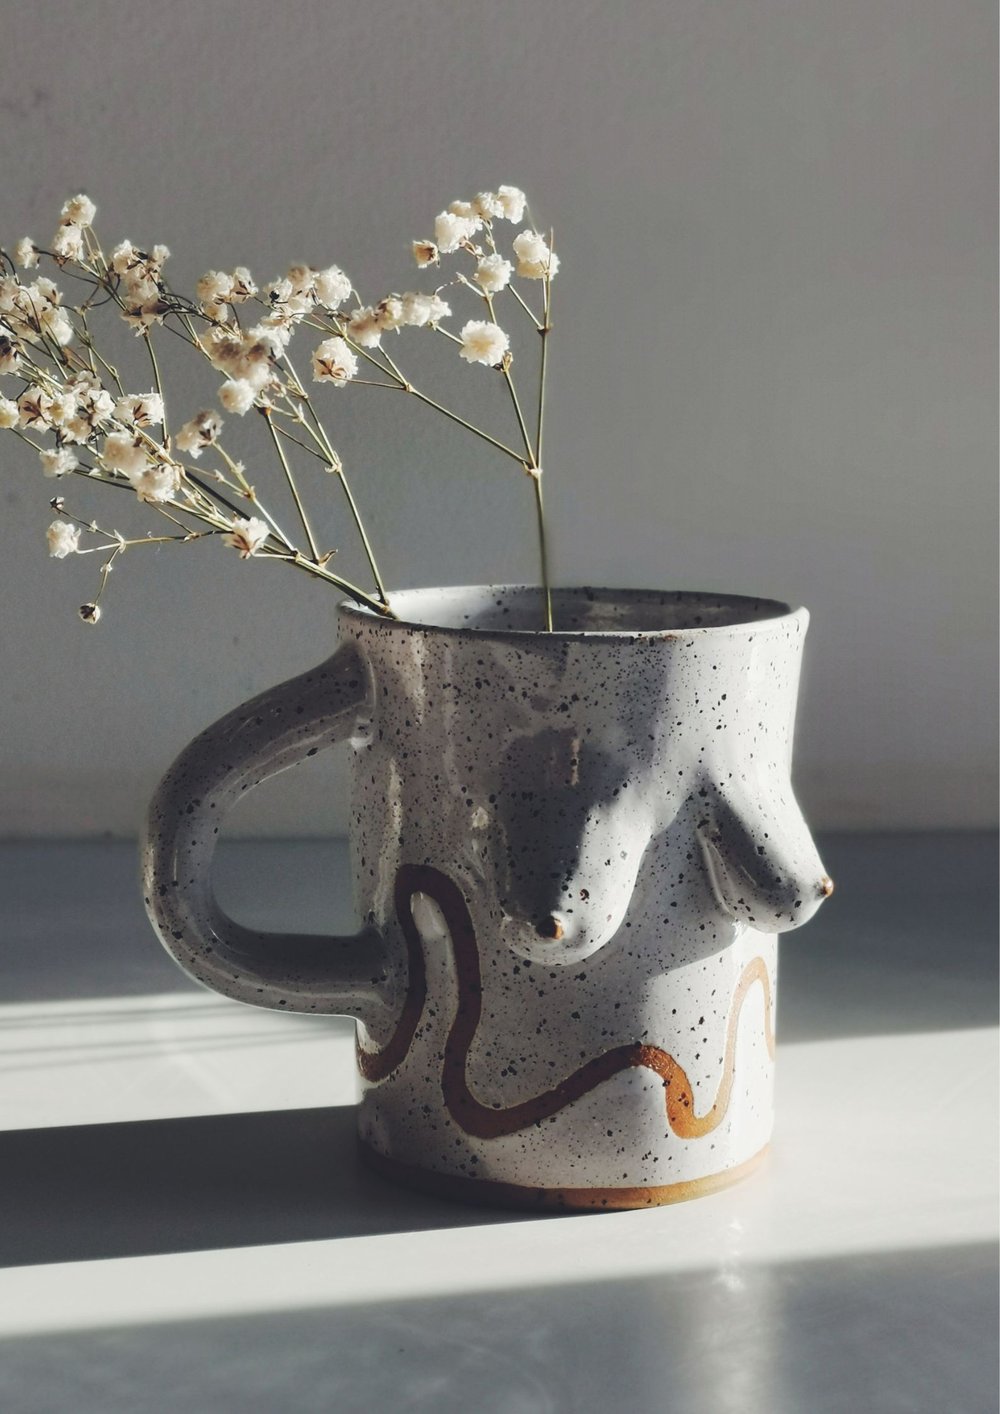 MADE TO ORDER Speckled Boob Mugs